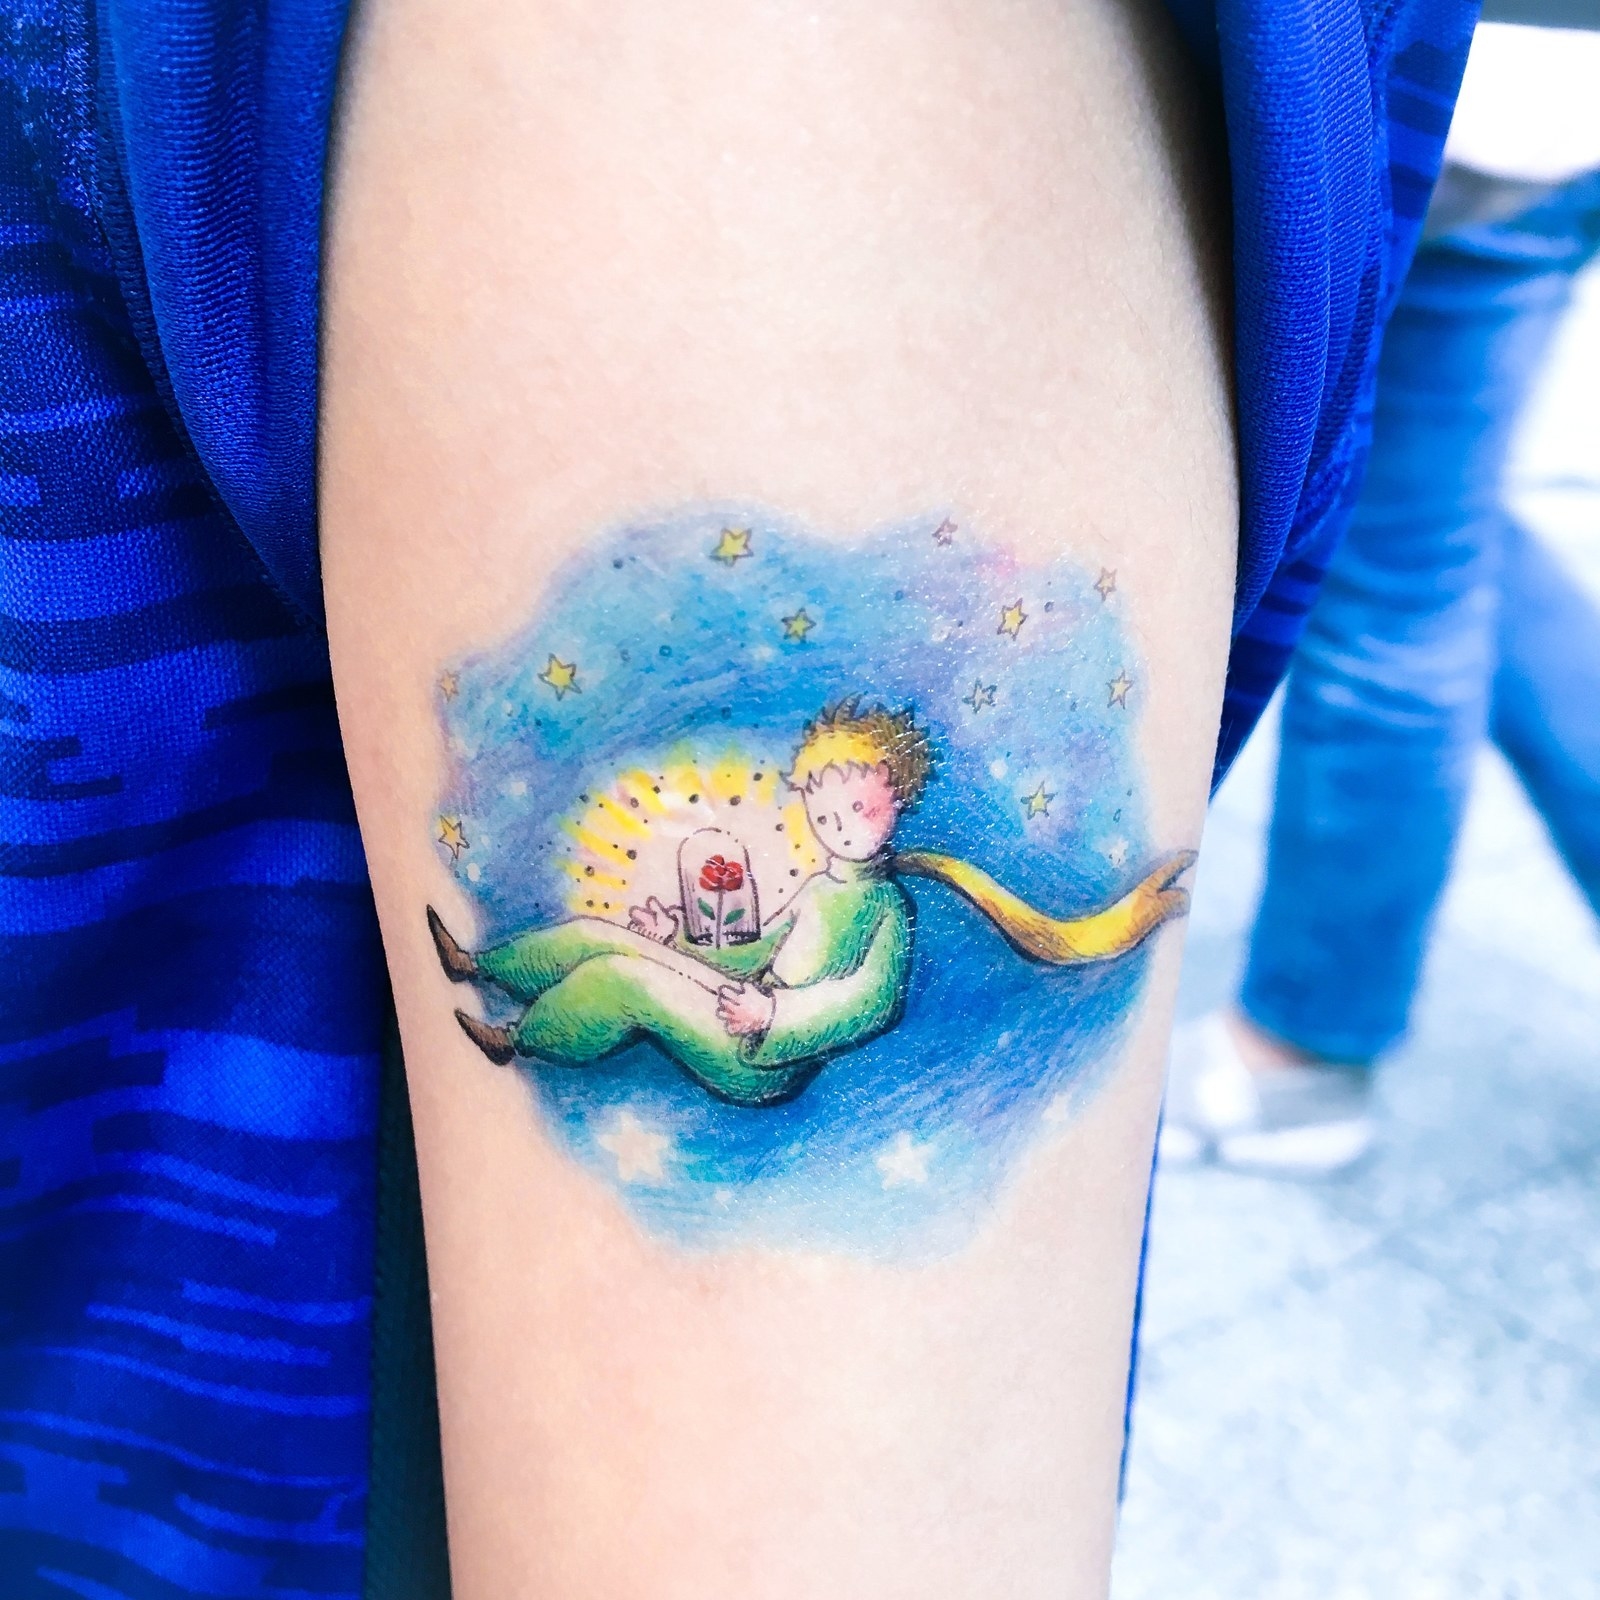 48 Temporary Tattoos You'll Want On Your Body Immediately